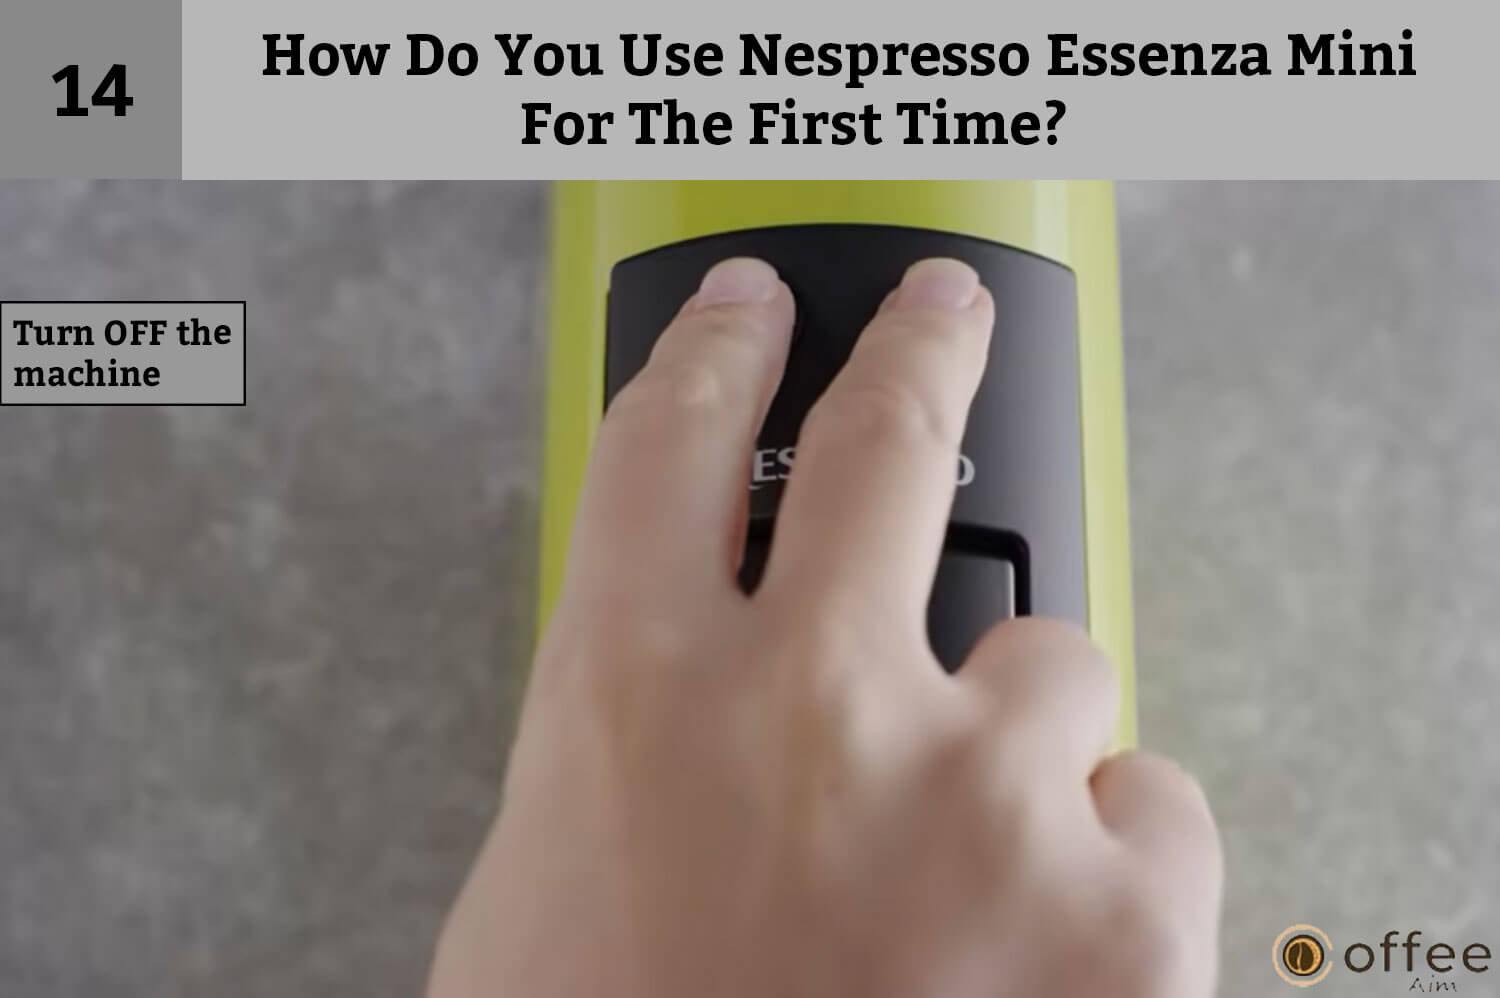 Fourteenth  instruction of How Do You Use Nespresso Essenza Mini For The First Time? is Turn off the machine.